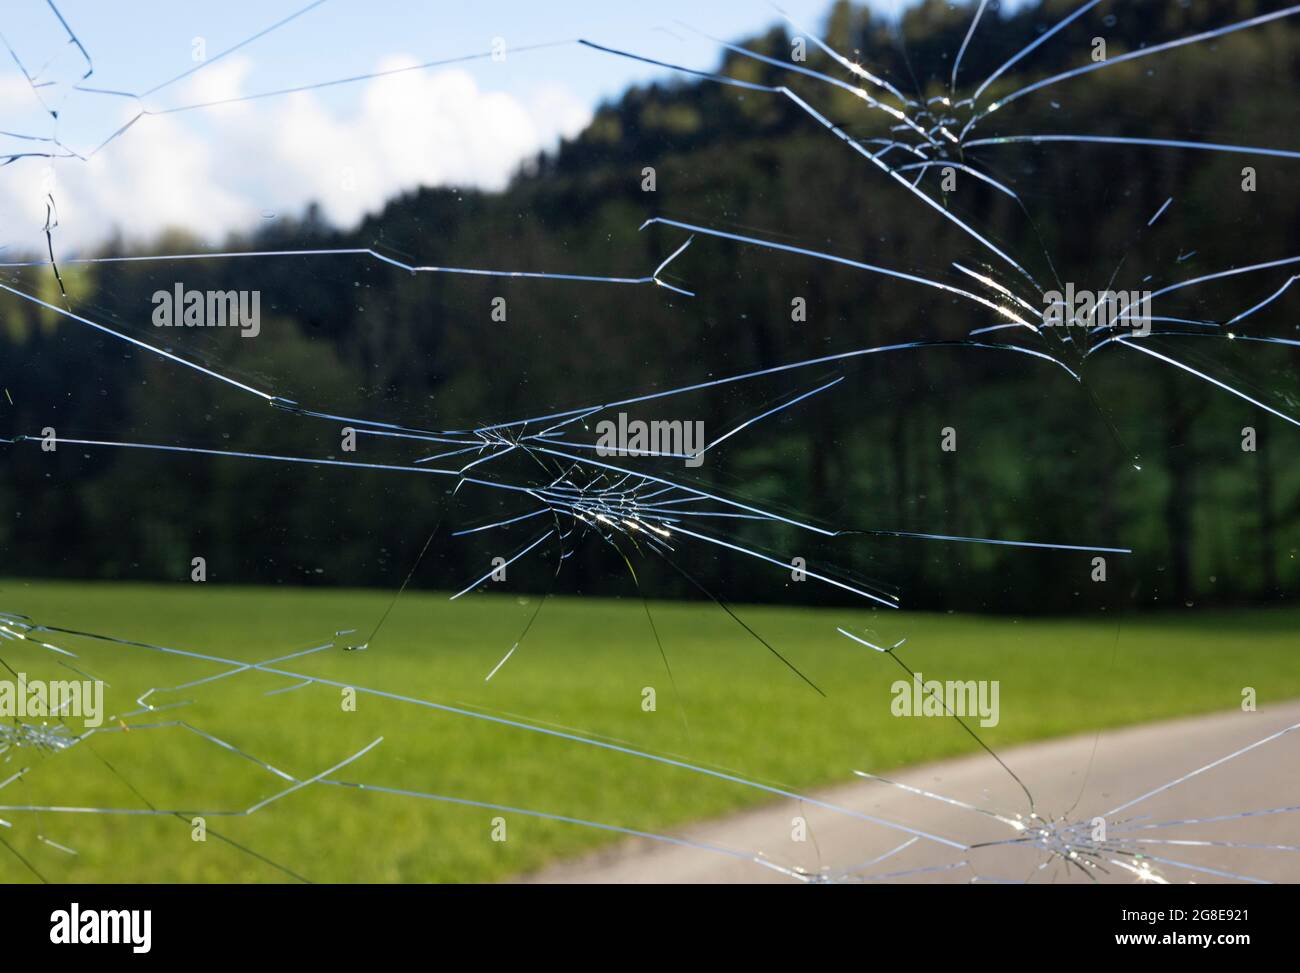 Shattered windscreen due to hailstones on a car, hail damage, Austria Stock Photo